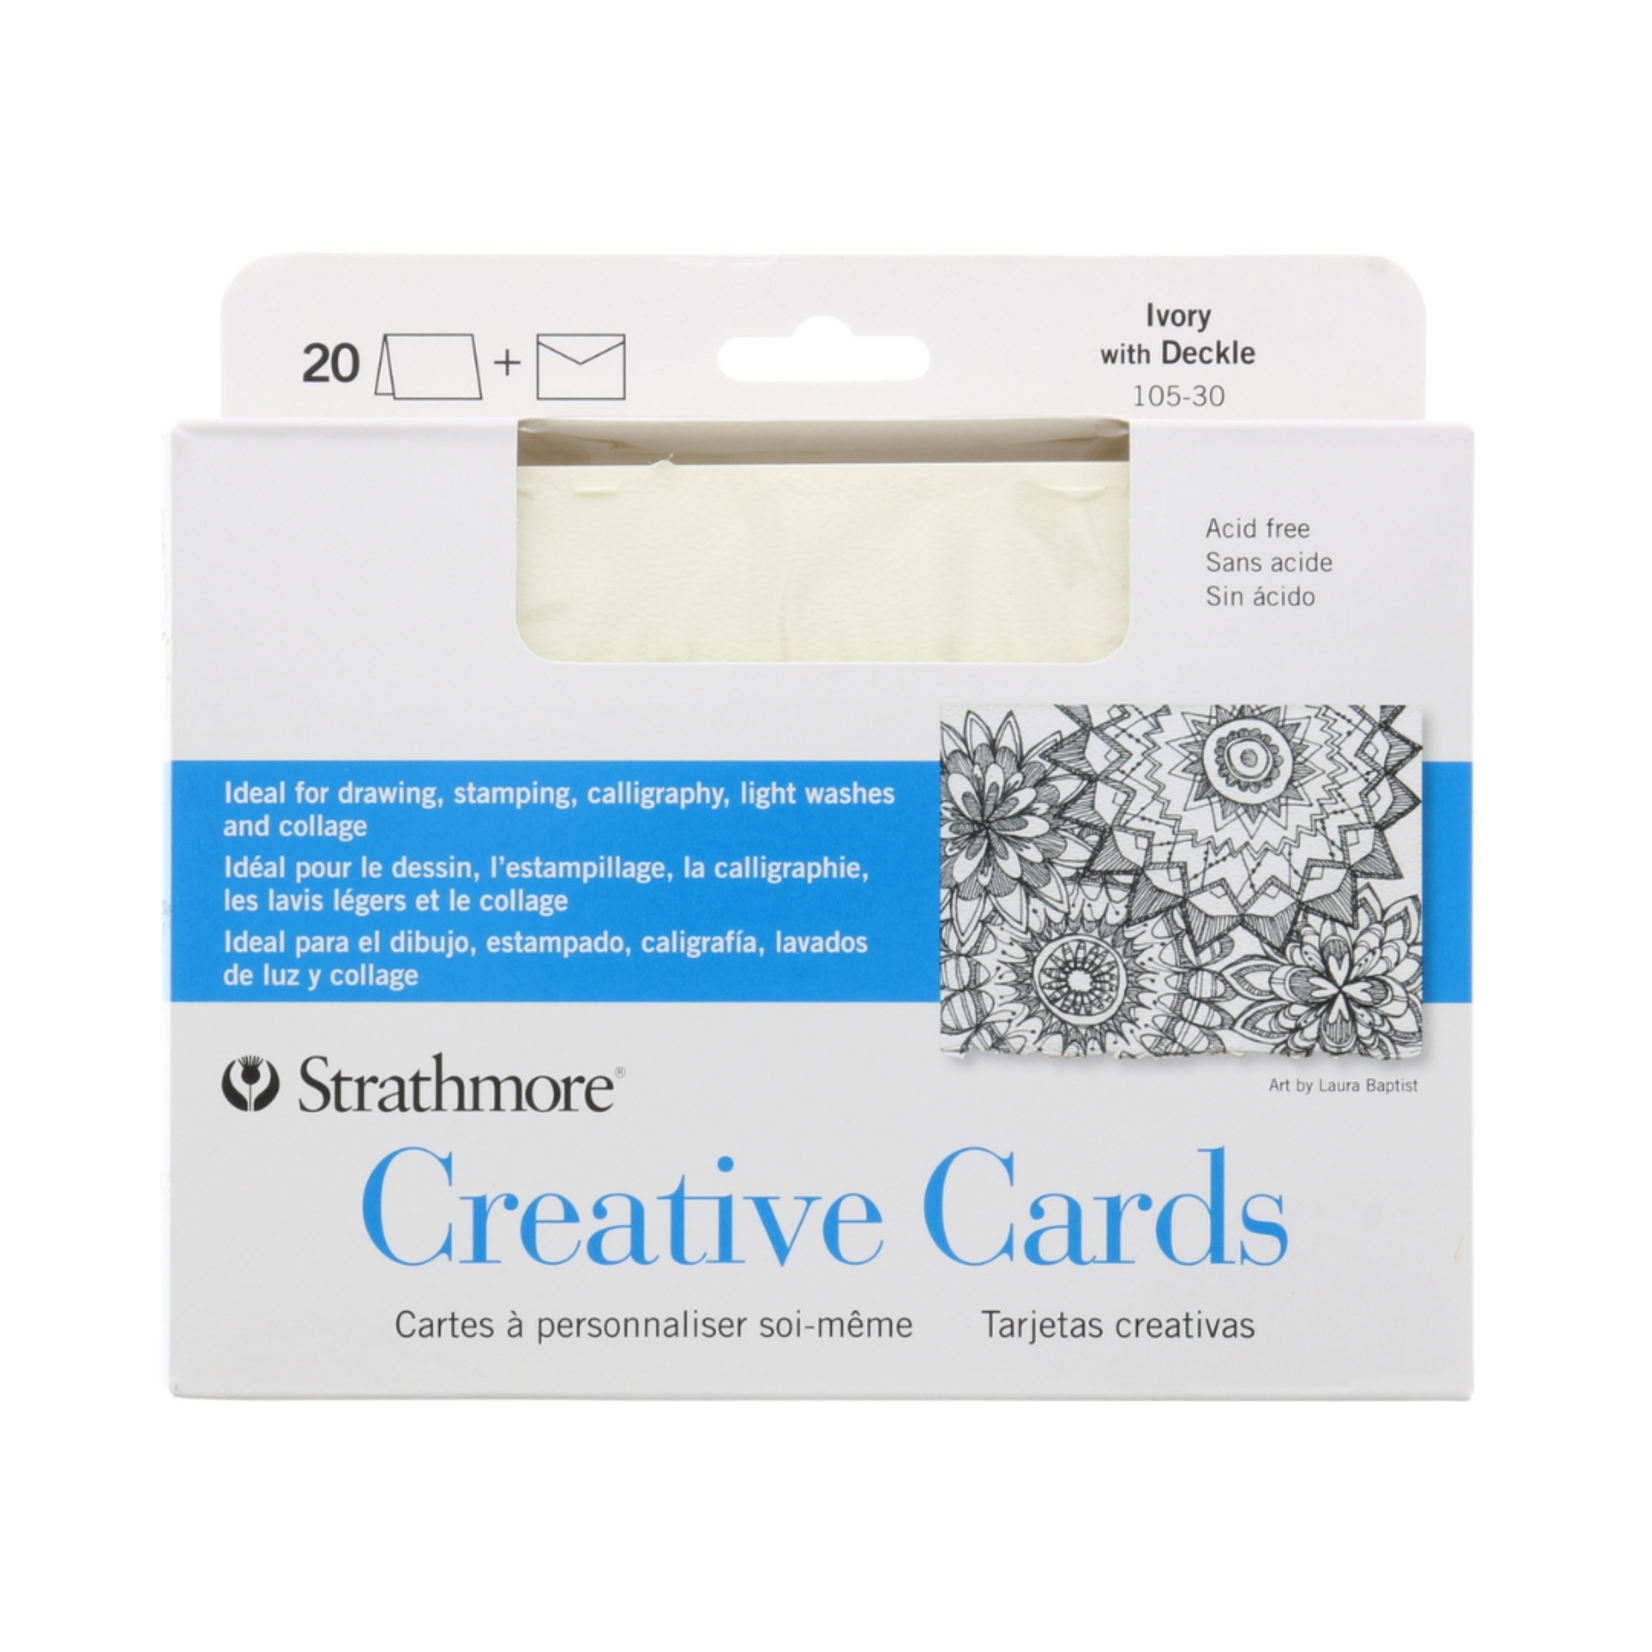 STRATHMORE STRATHMORE CREATIVE CARDS 5X7 IVORY WITH DECKLE 20/PK